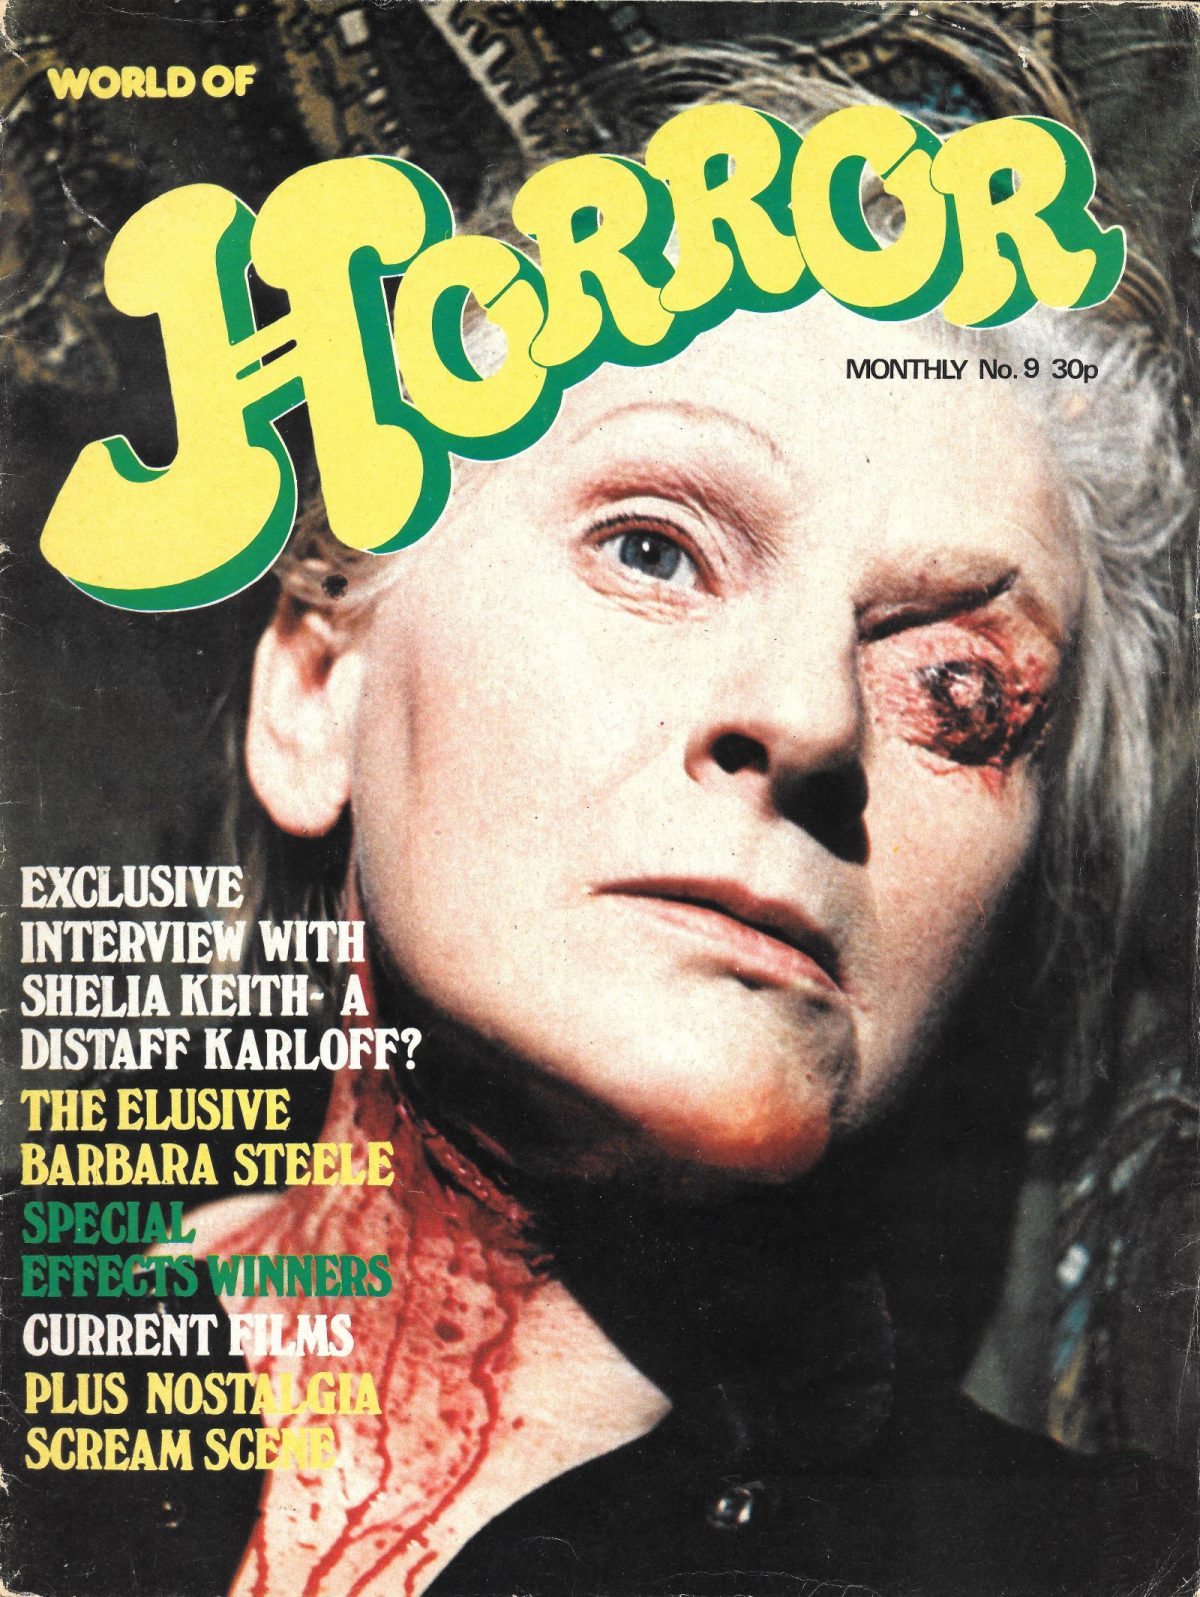 World of Horror, magazines, 1970s, horror movies, Peter Cushing, Christopher Lee, Vincent Price, cult, occult, Sheila Keith